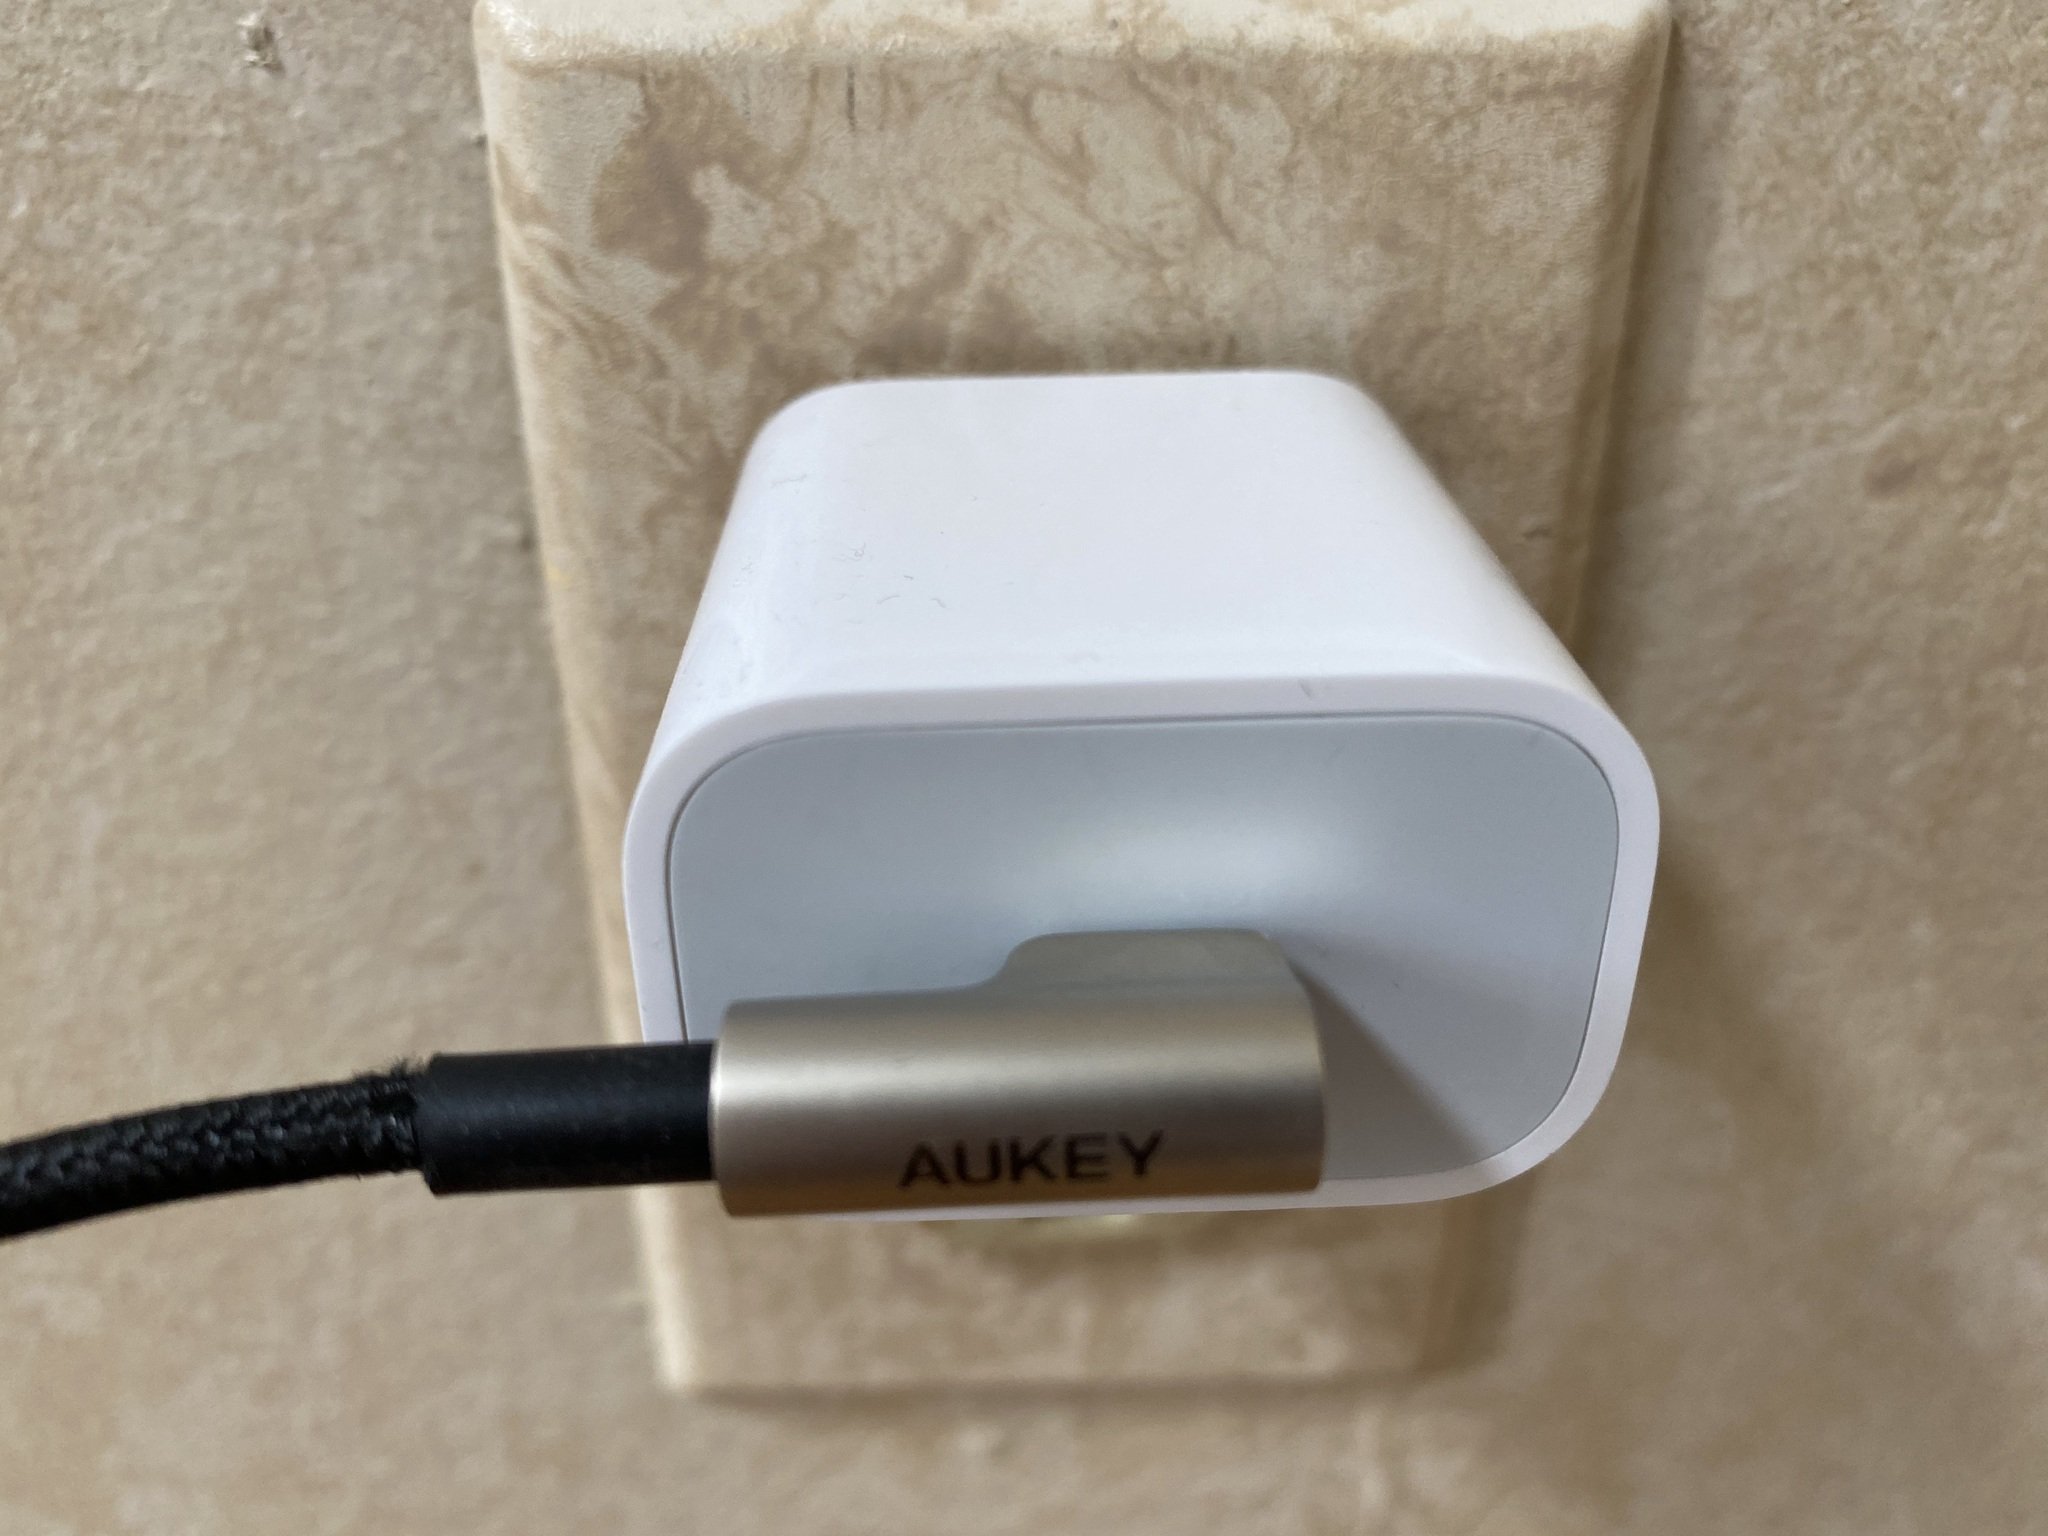 Aukey Right Angle Charging Cable Usb C